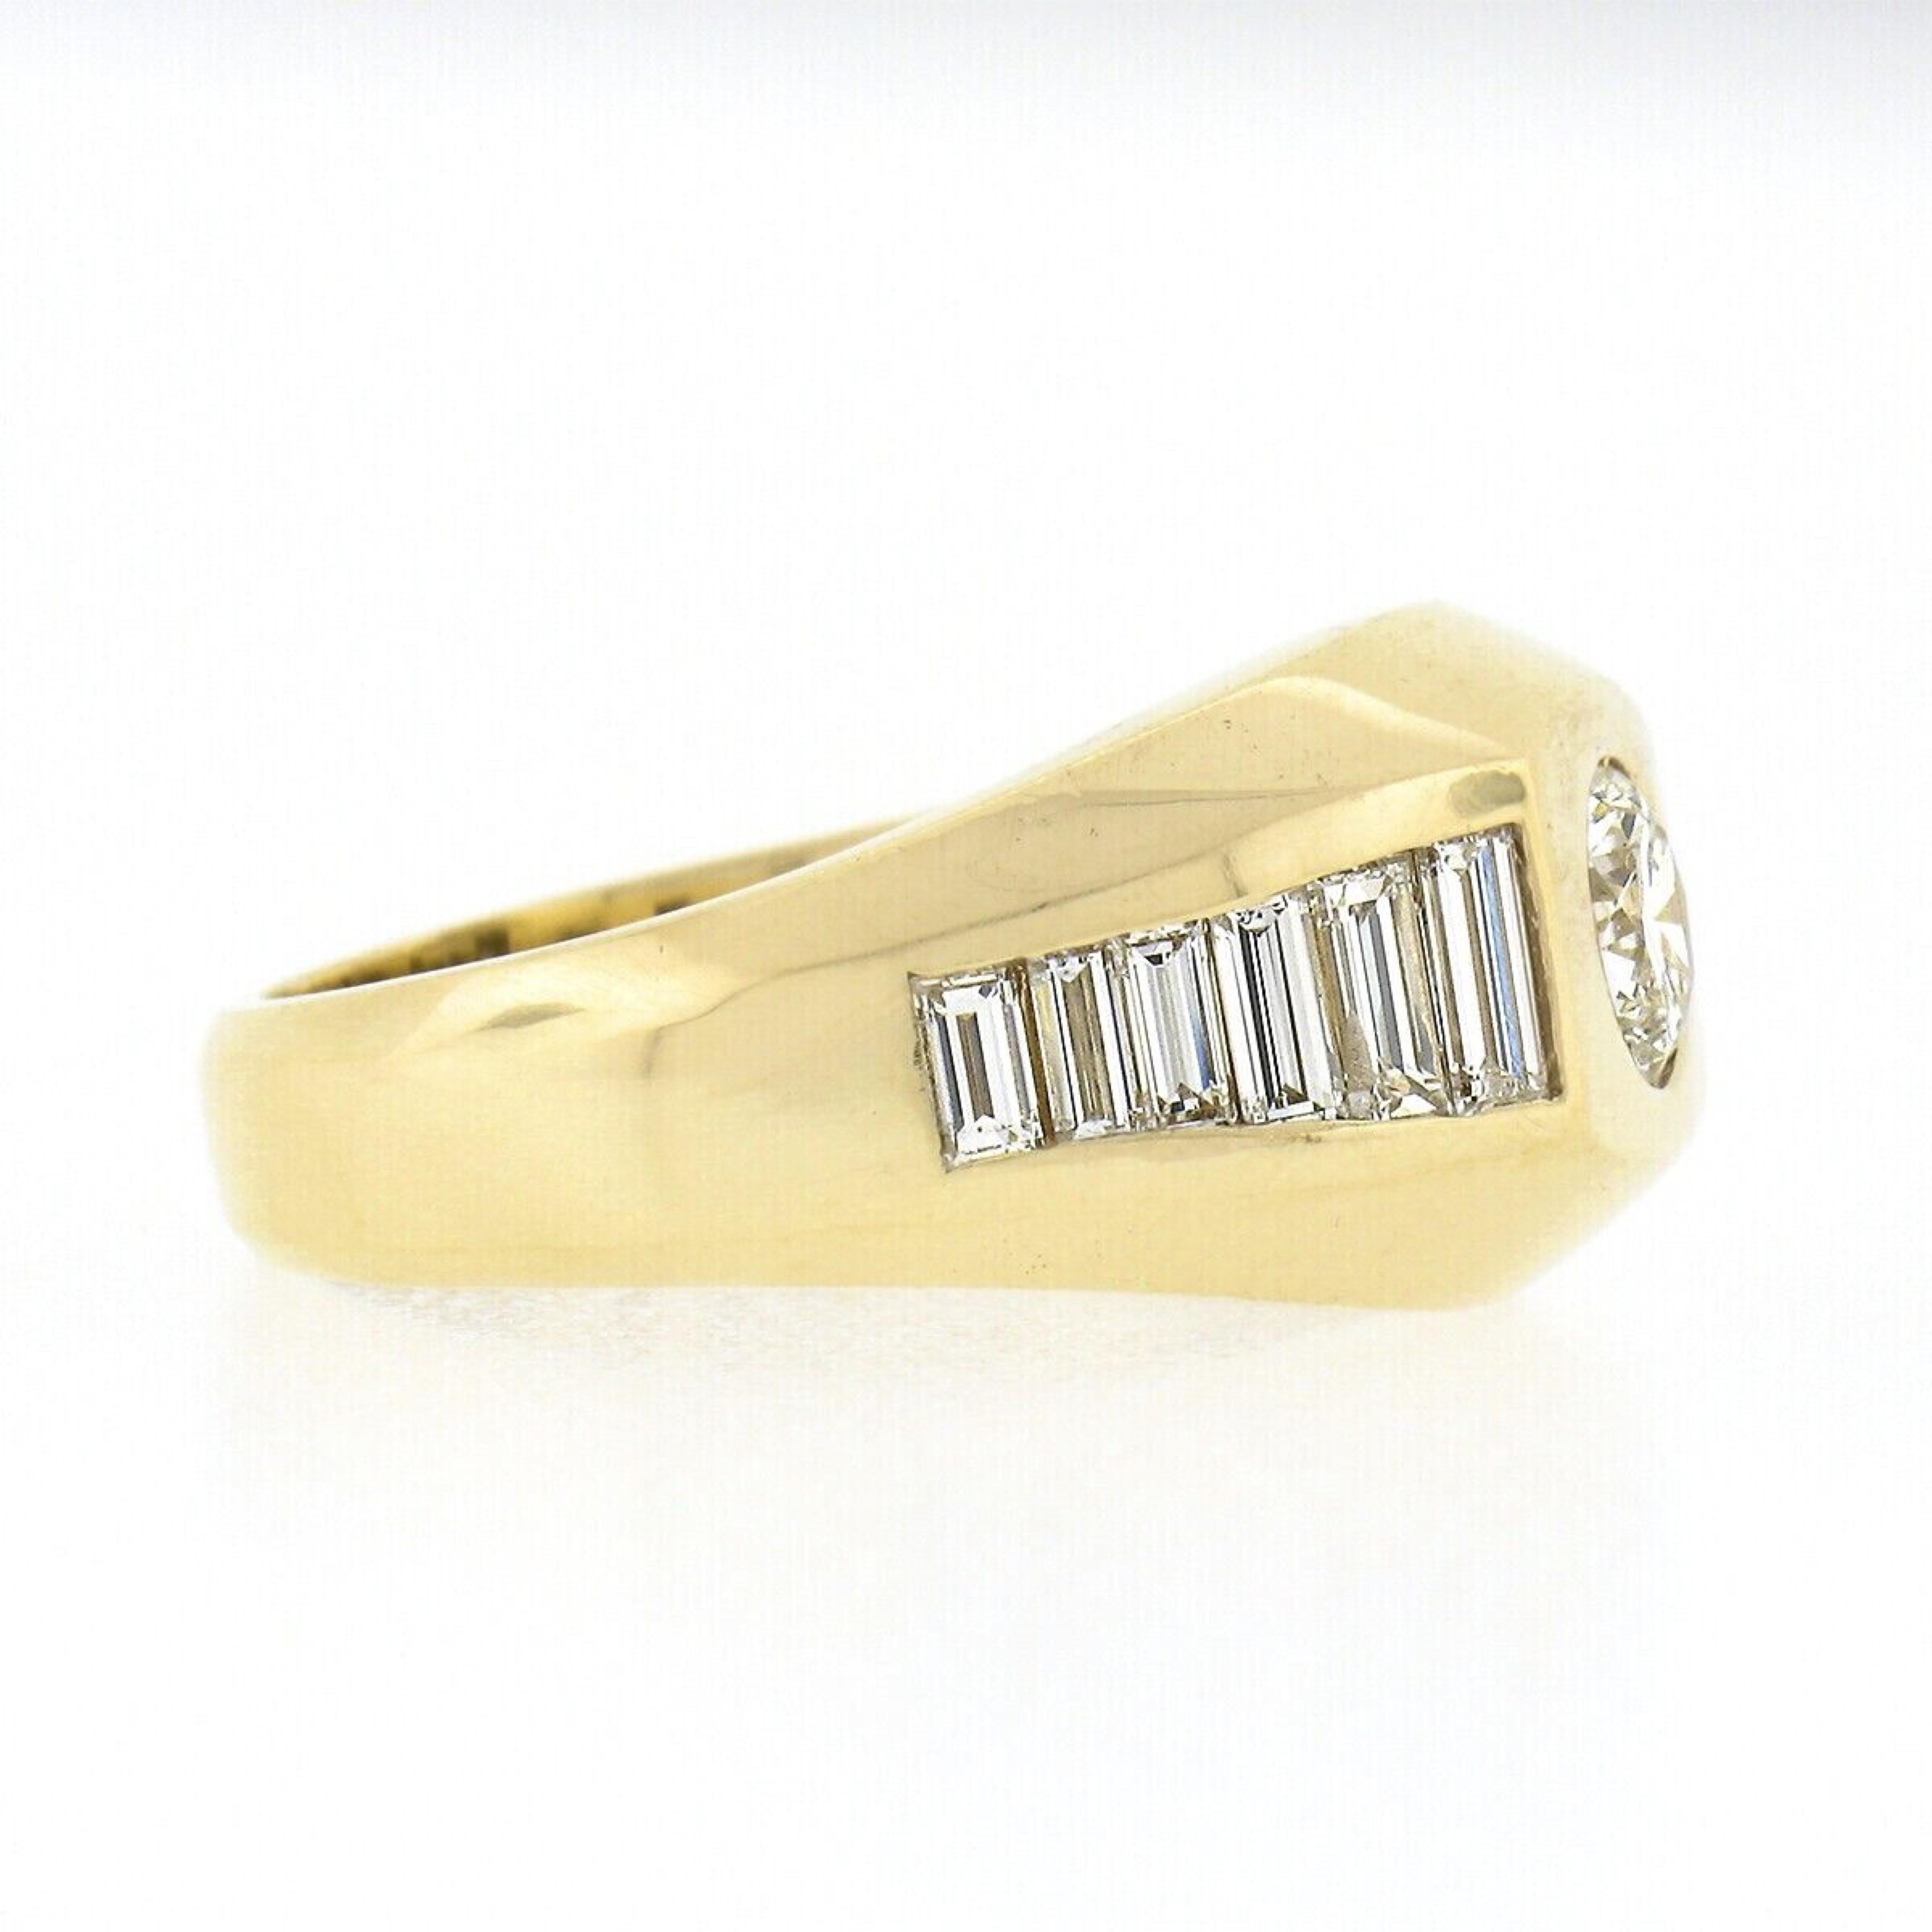 Retro Mens Vintage 18k Gold 1.83ct Round Diamond Solitaire w/ Baguette Sides Band Ring